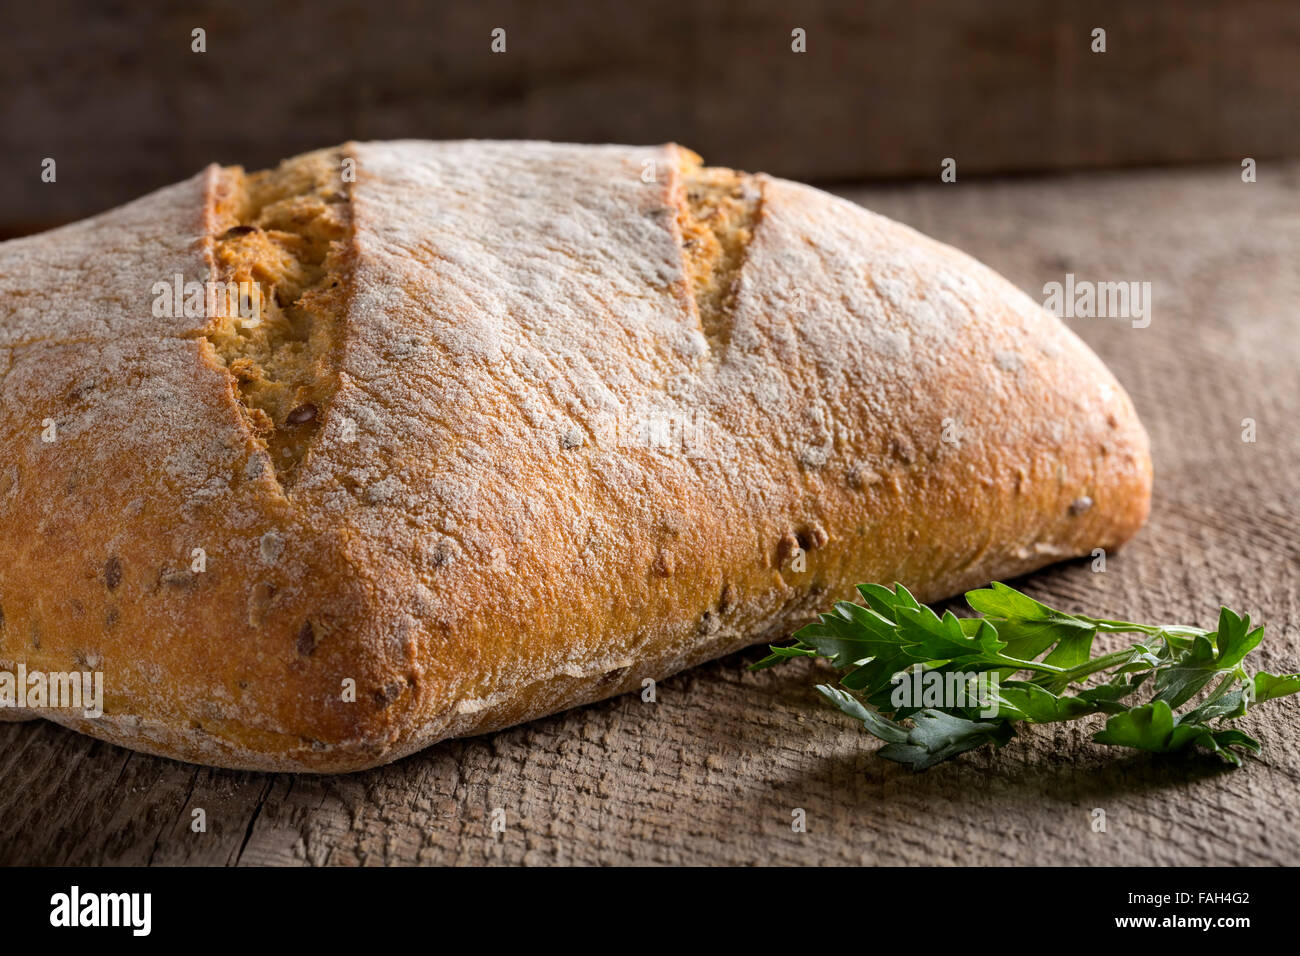 Homemade fresh baked bread loaf and parsley over rustic wooden background Stock Photo